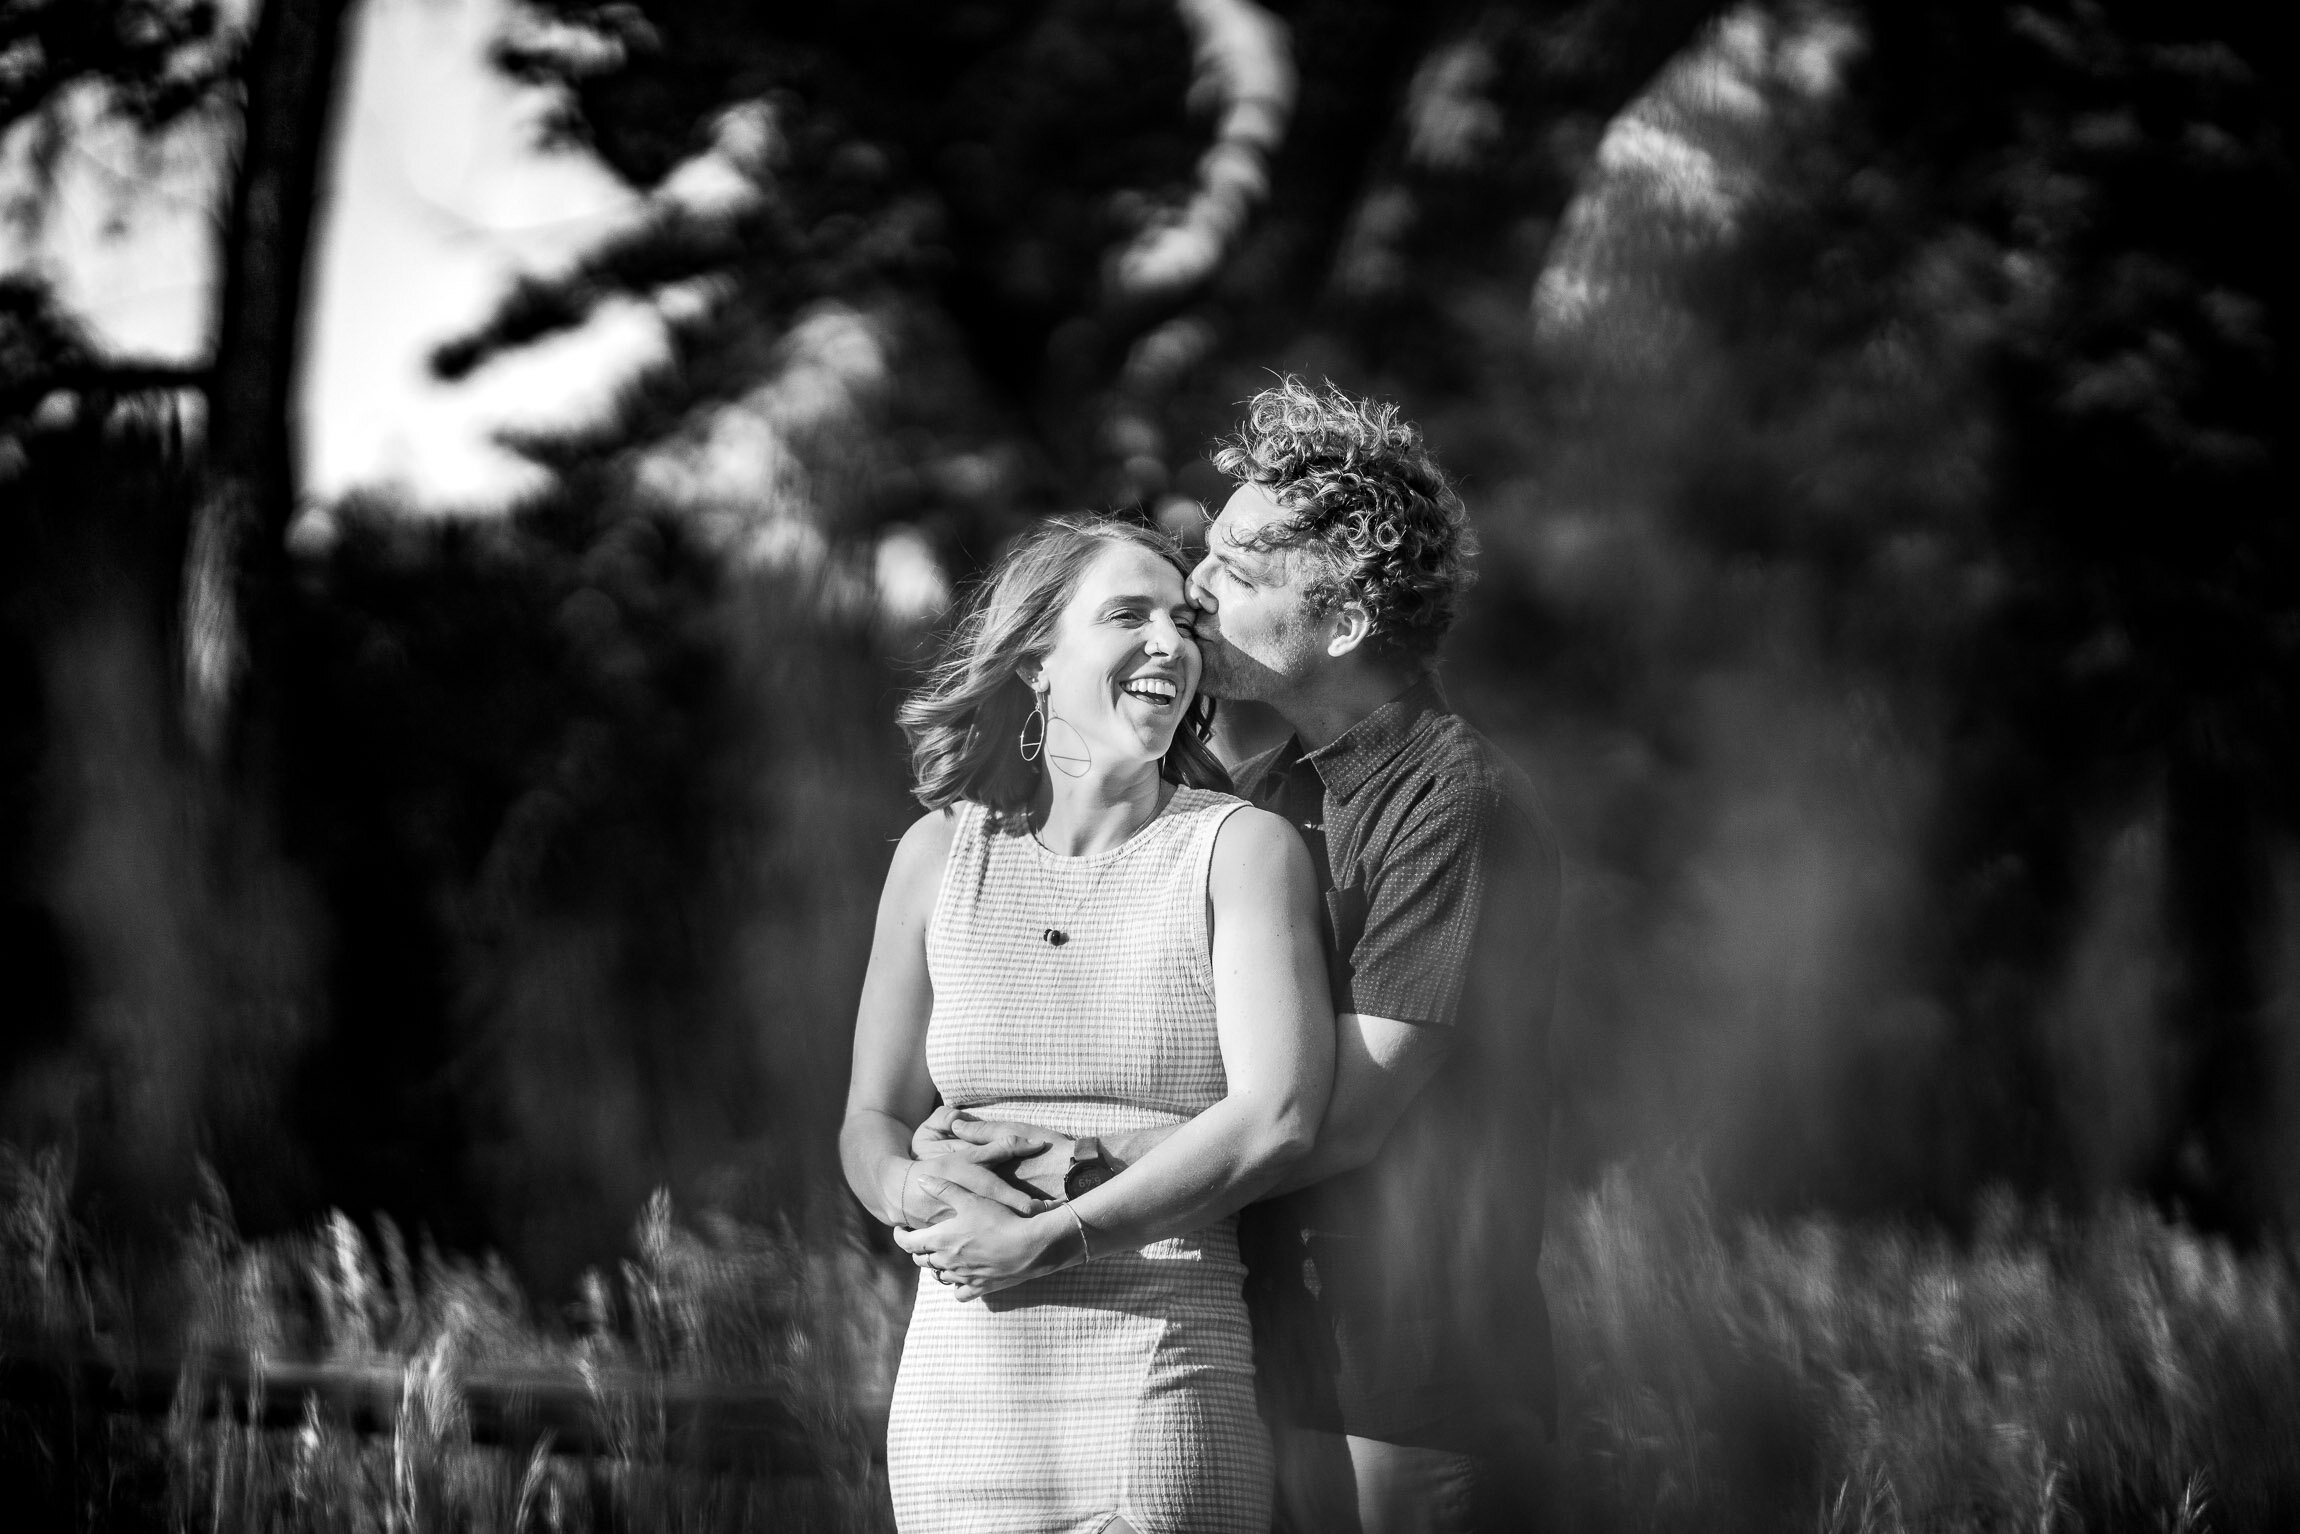 Engaged couple walks while holding hands in the tall windswept grass during golden hour, Engagement Session, Engagement Photos, Engagement Photos Inspiration, Engagement Photography, Engagement Photographer, Winter Engagement Photos, Mountain Engagement Photos, Denver engagement session, Denver engagement photos, Denver engagement photography, Denver engagement photographer, Denver engagement inspiration, Colorado engagement session, Colorado engagement photos, Colorado engagement photography, Colorado engagement photographer, Colorado engagement inspiration